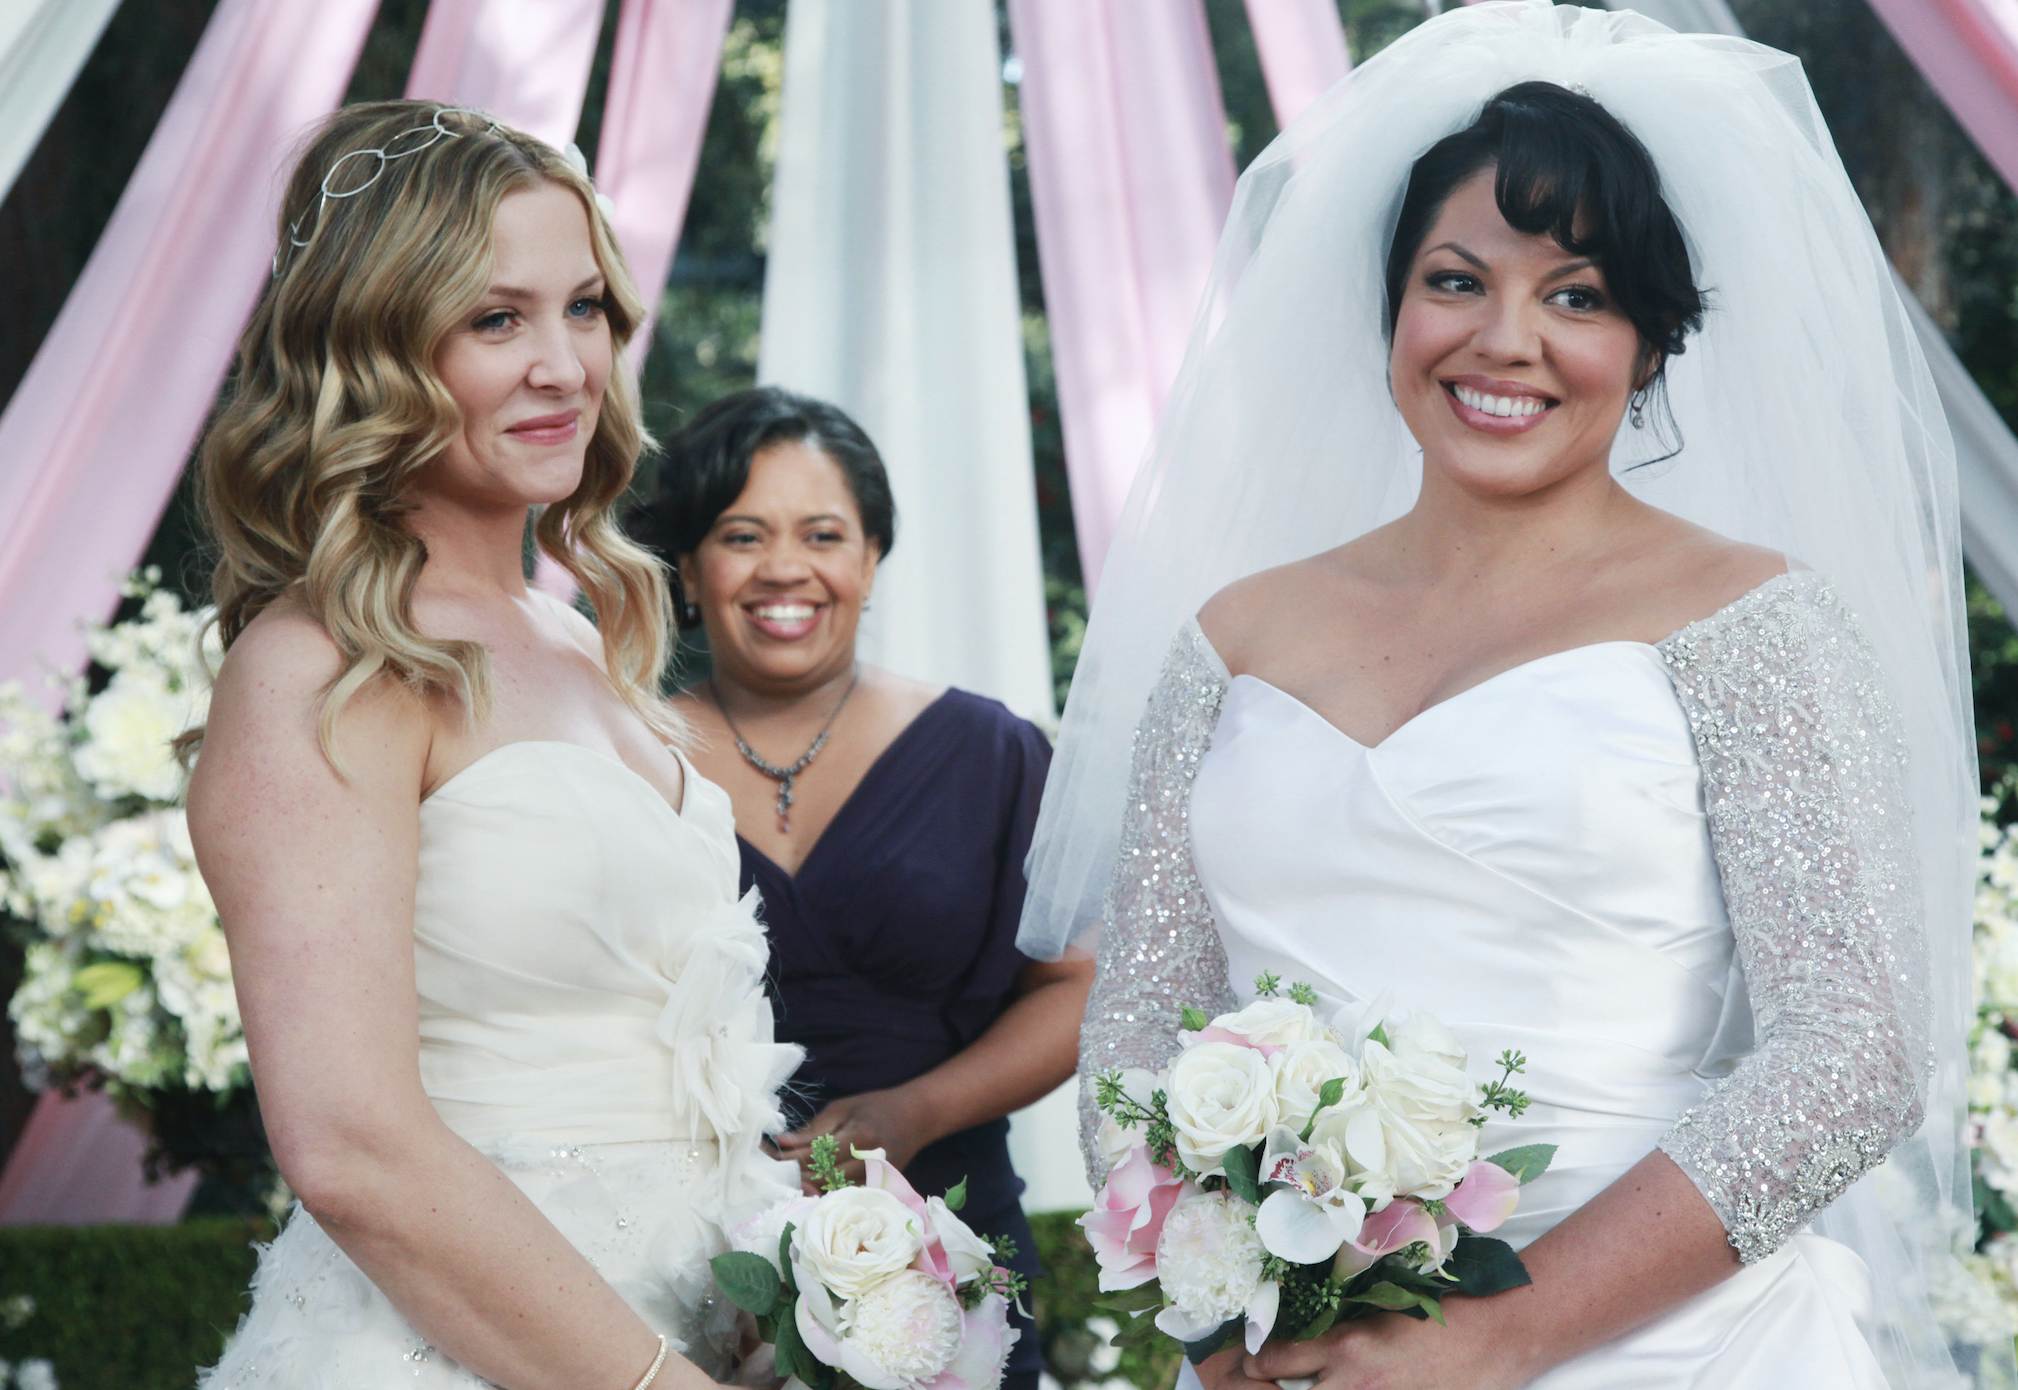 Callie and Arizona smiling in their wedding dresses